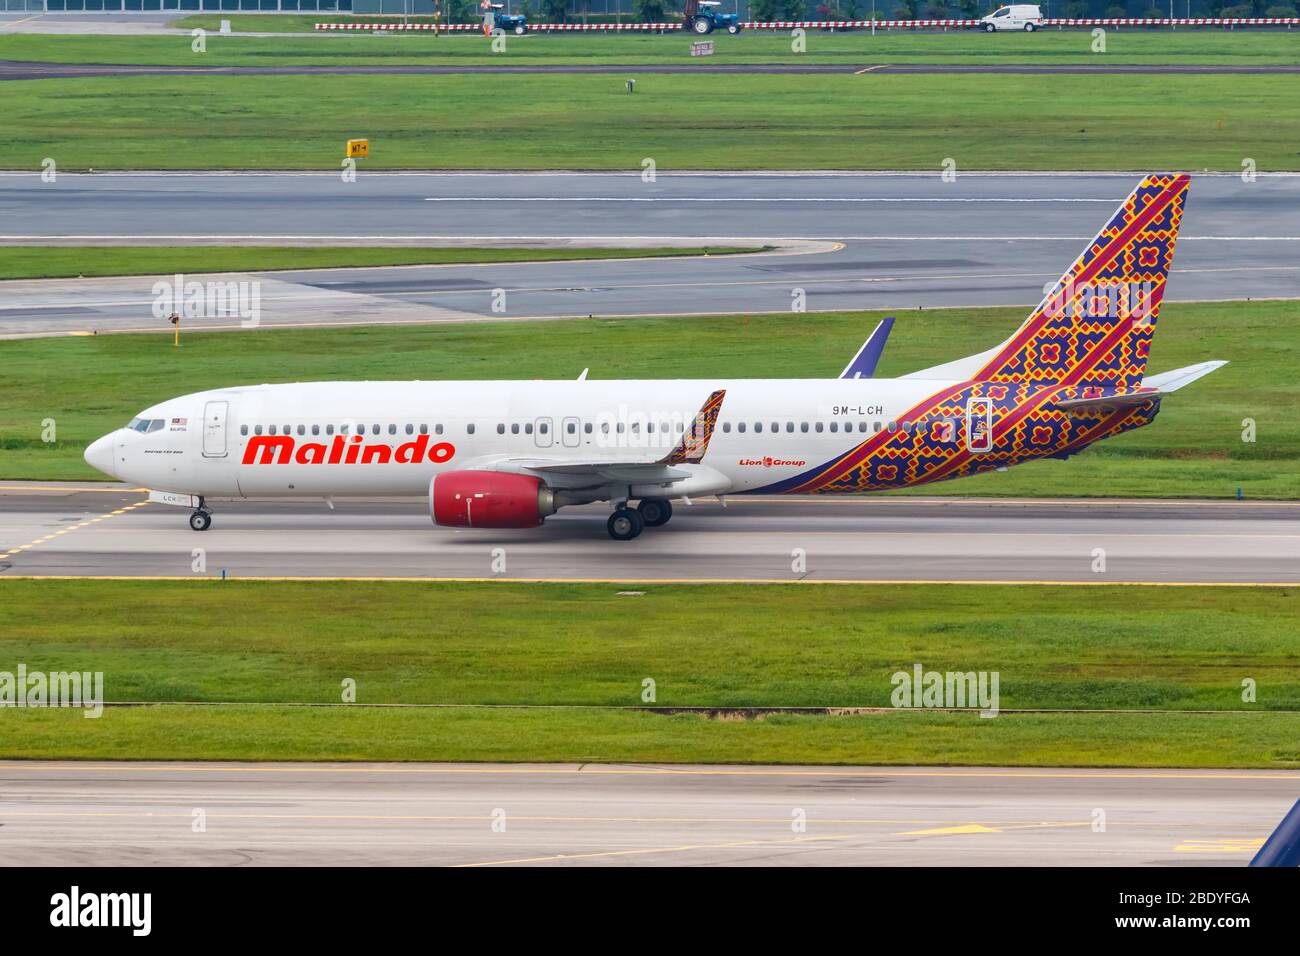 Changi, Singapore – January 29, 2018: Malindo Air Boeing 737-800 airplane at Changi airport (SIN) in Singapore. Boeing is an American aircraft manufac Stock Photo